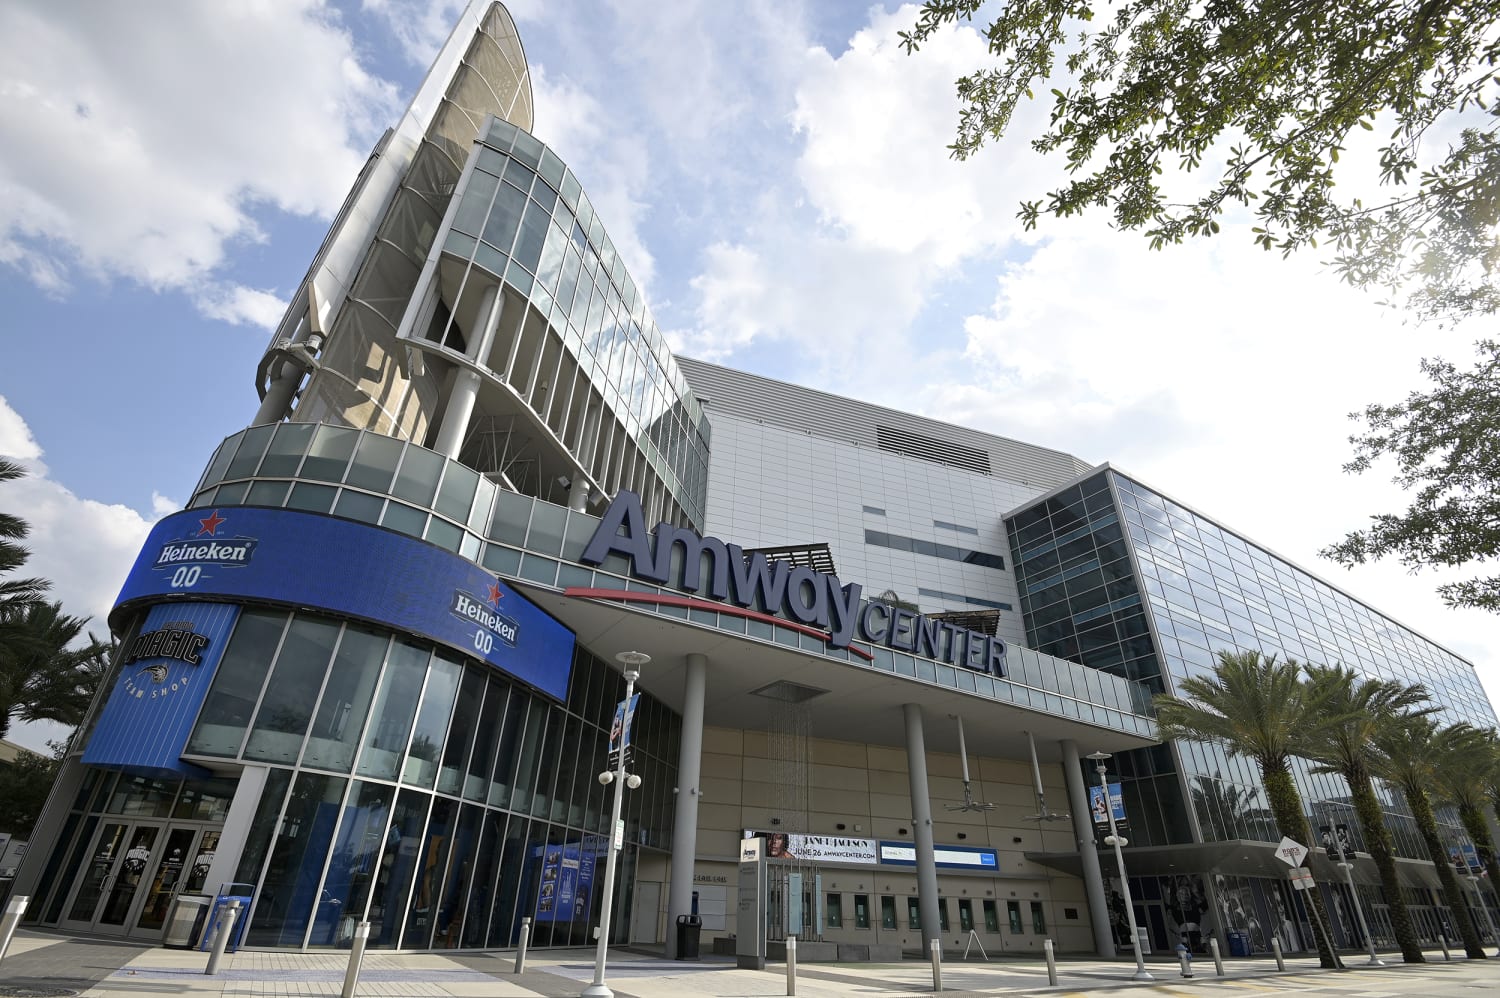 Orlando Magic to open arena to voters, as NBA election push grows